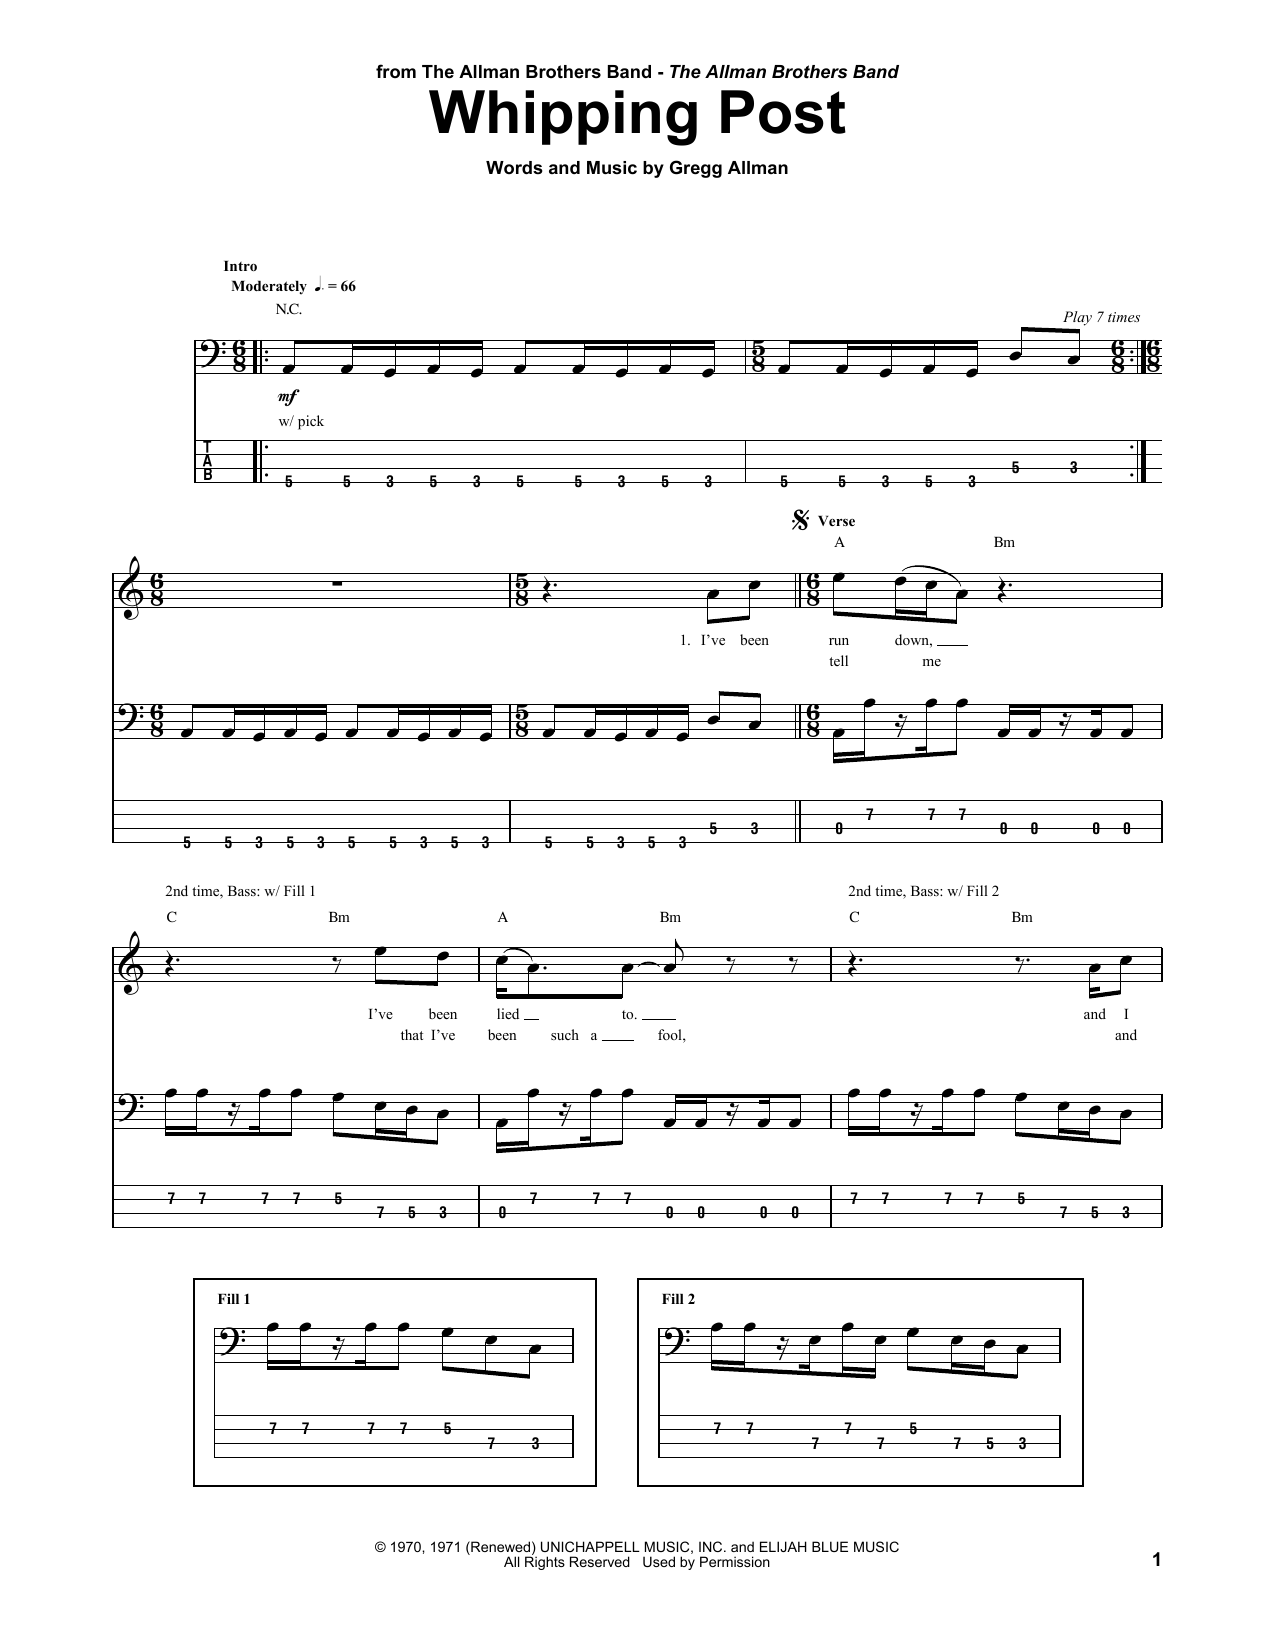 Download The Allman Brothers Band Whipping Post Sheet Music